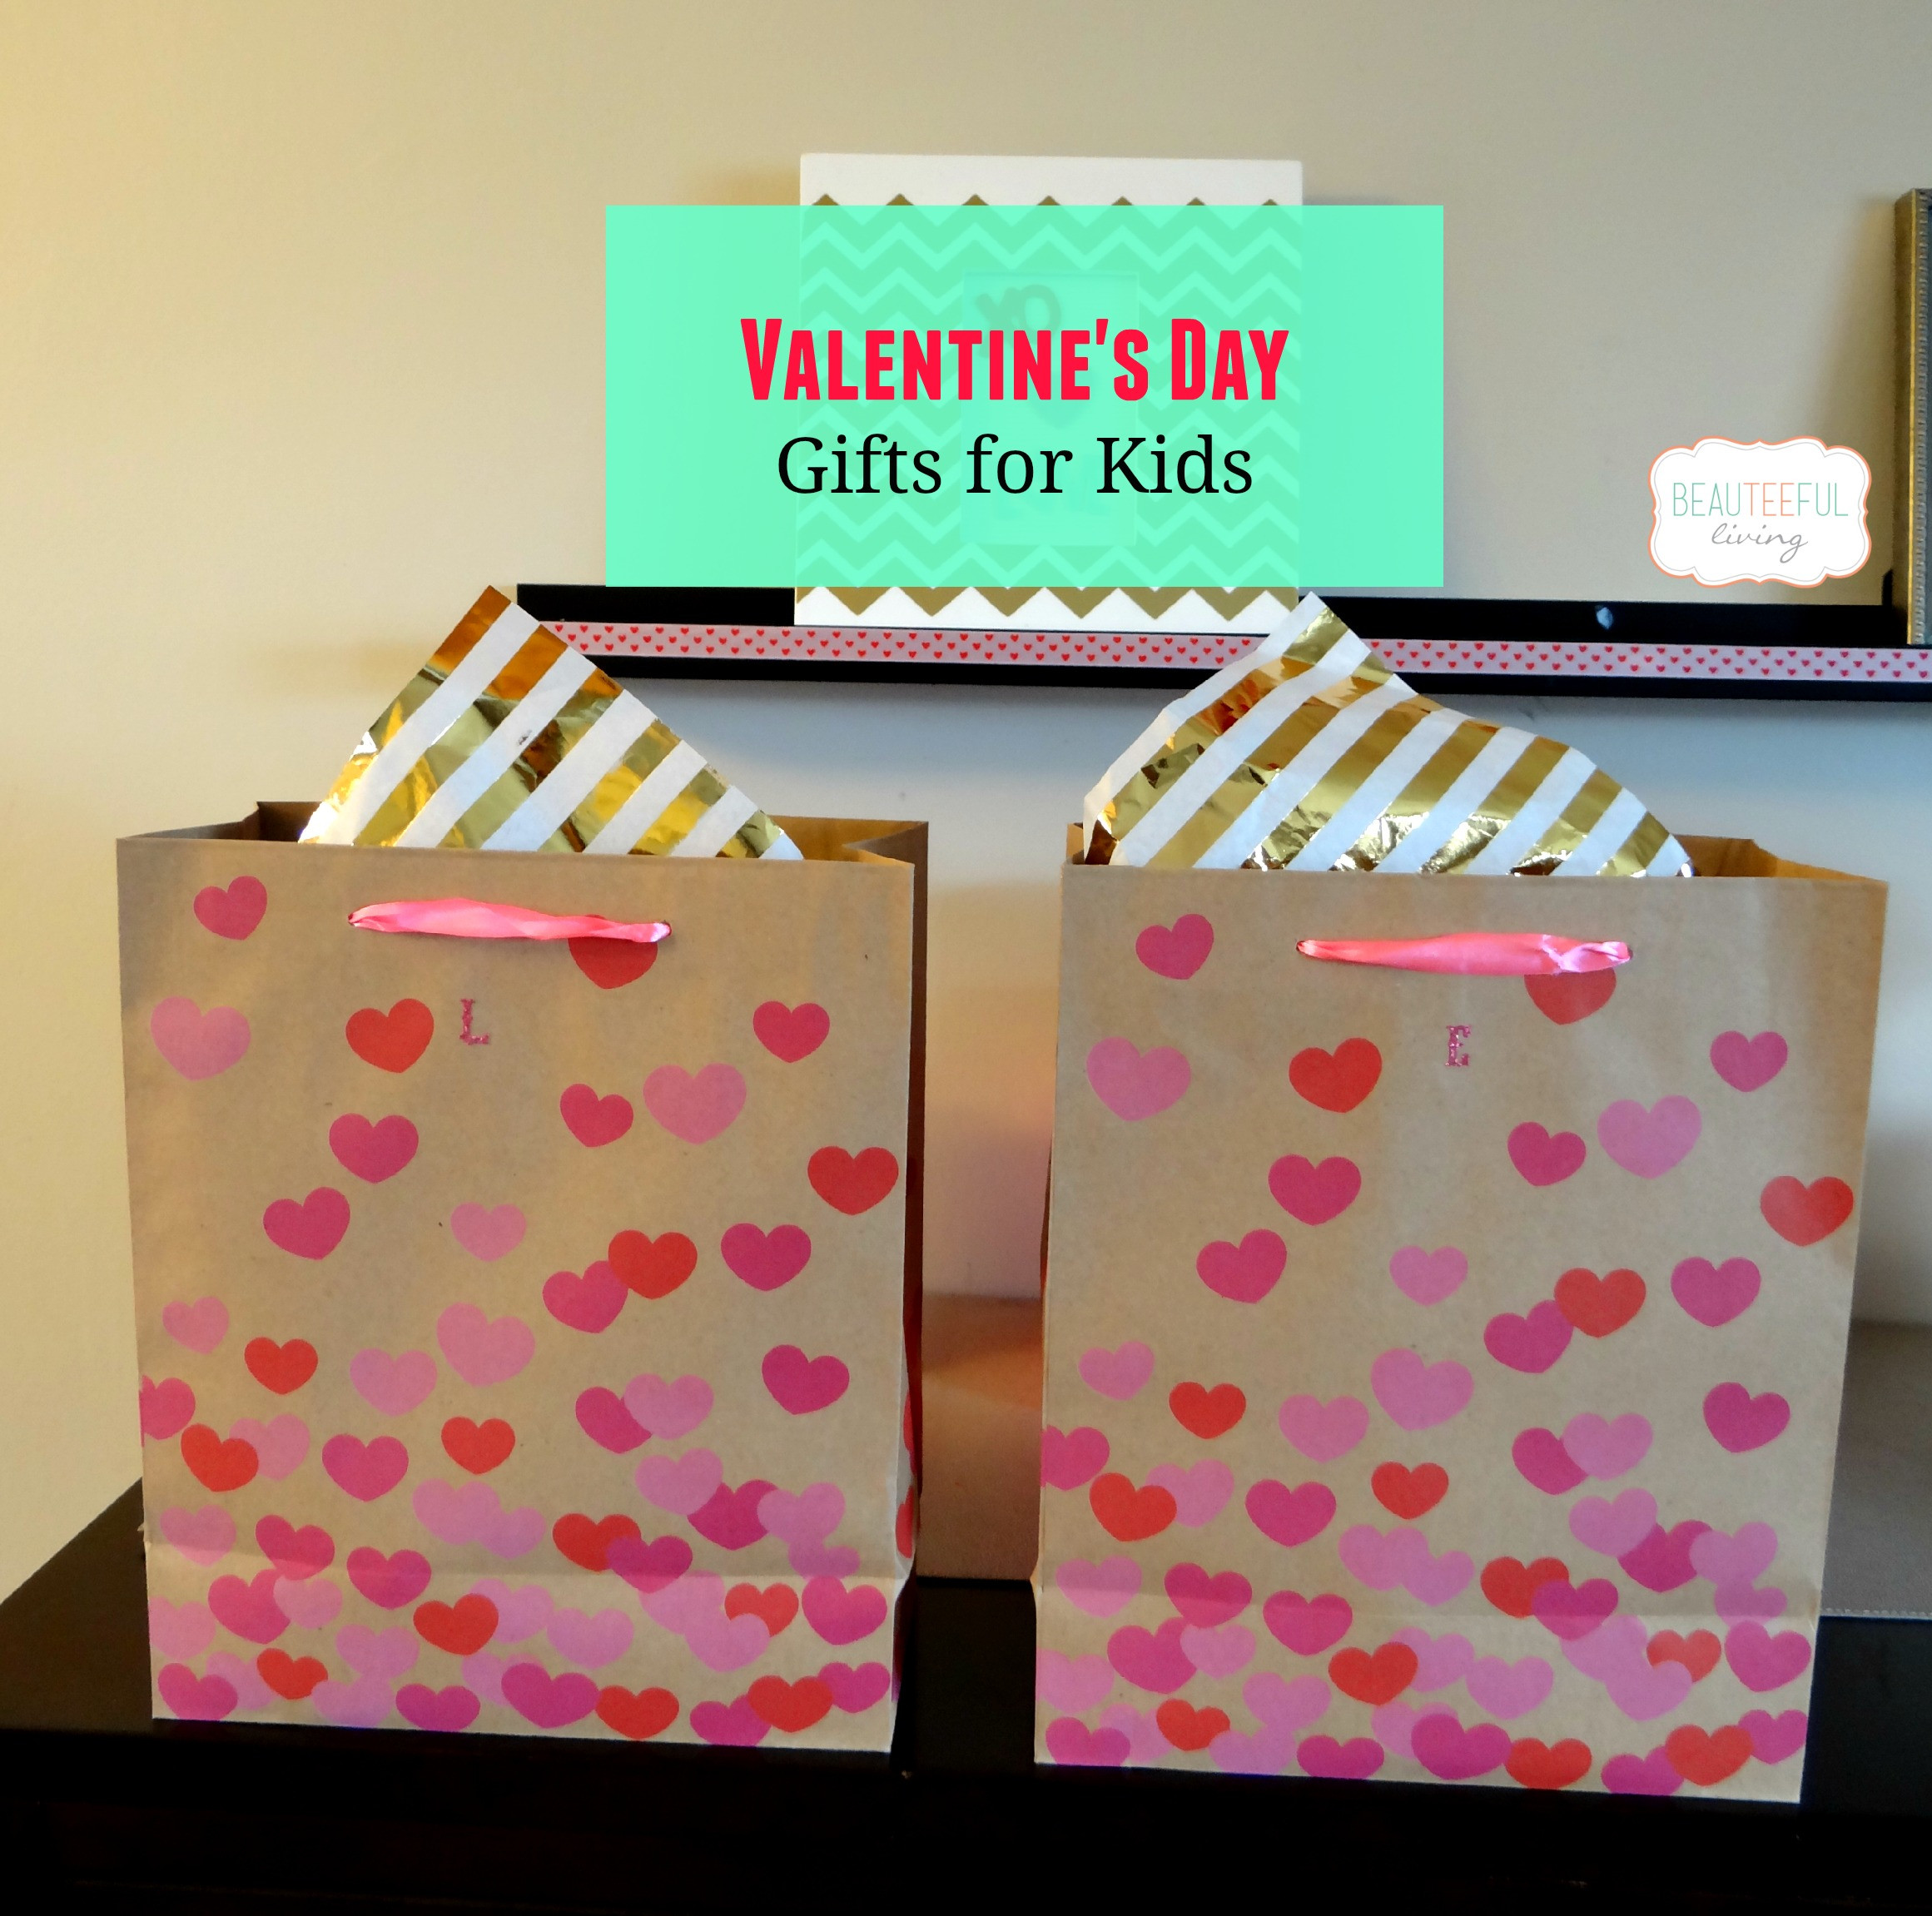 Kids Valentines Day Gifts
 Valentine s Day Gifts for Kids BEAUTEEFUL Living